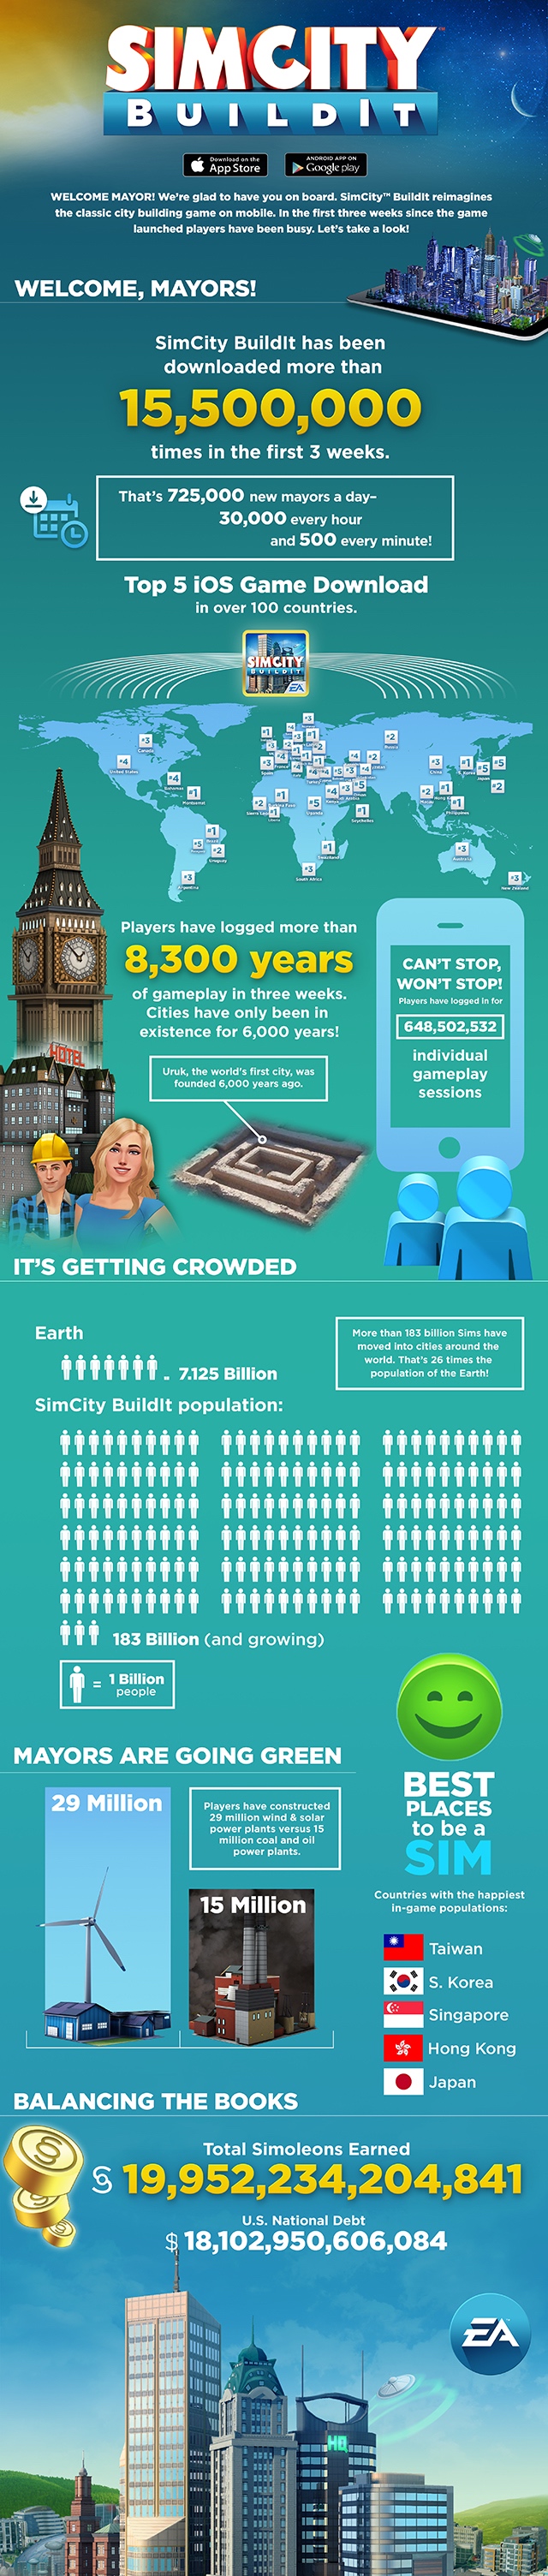 Infographic SimCity BuildIt 15 Million Downloads in 3 Weeks!